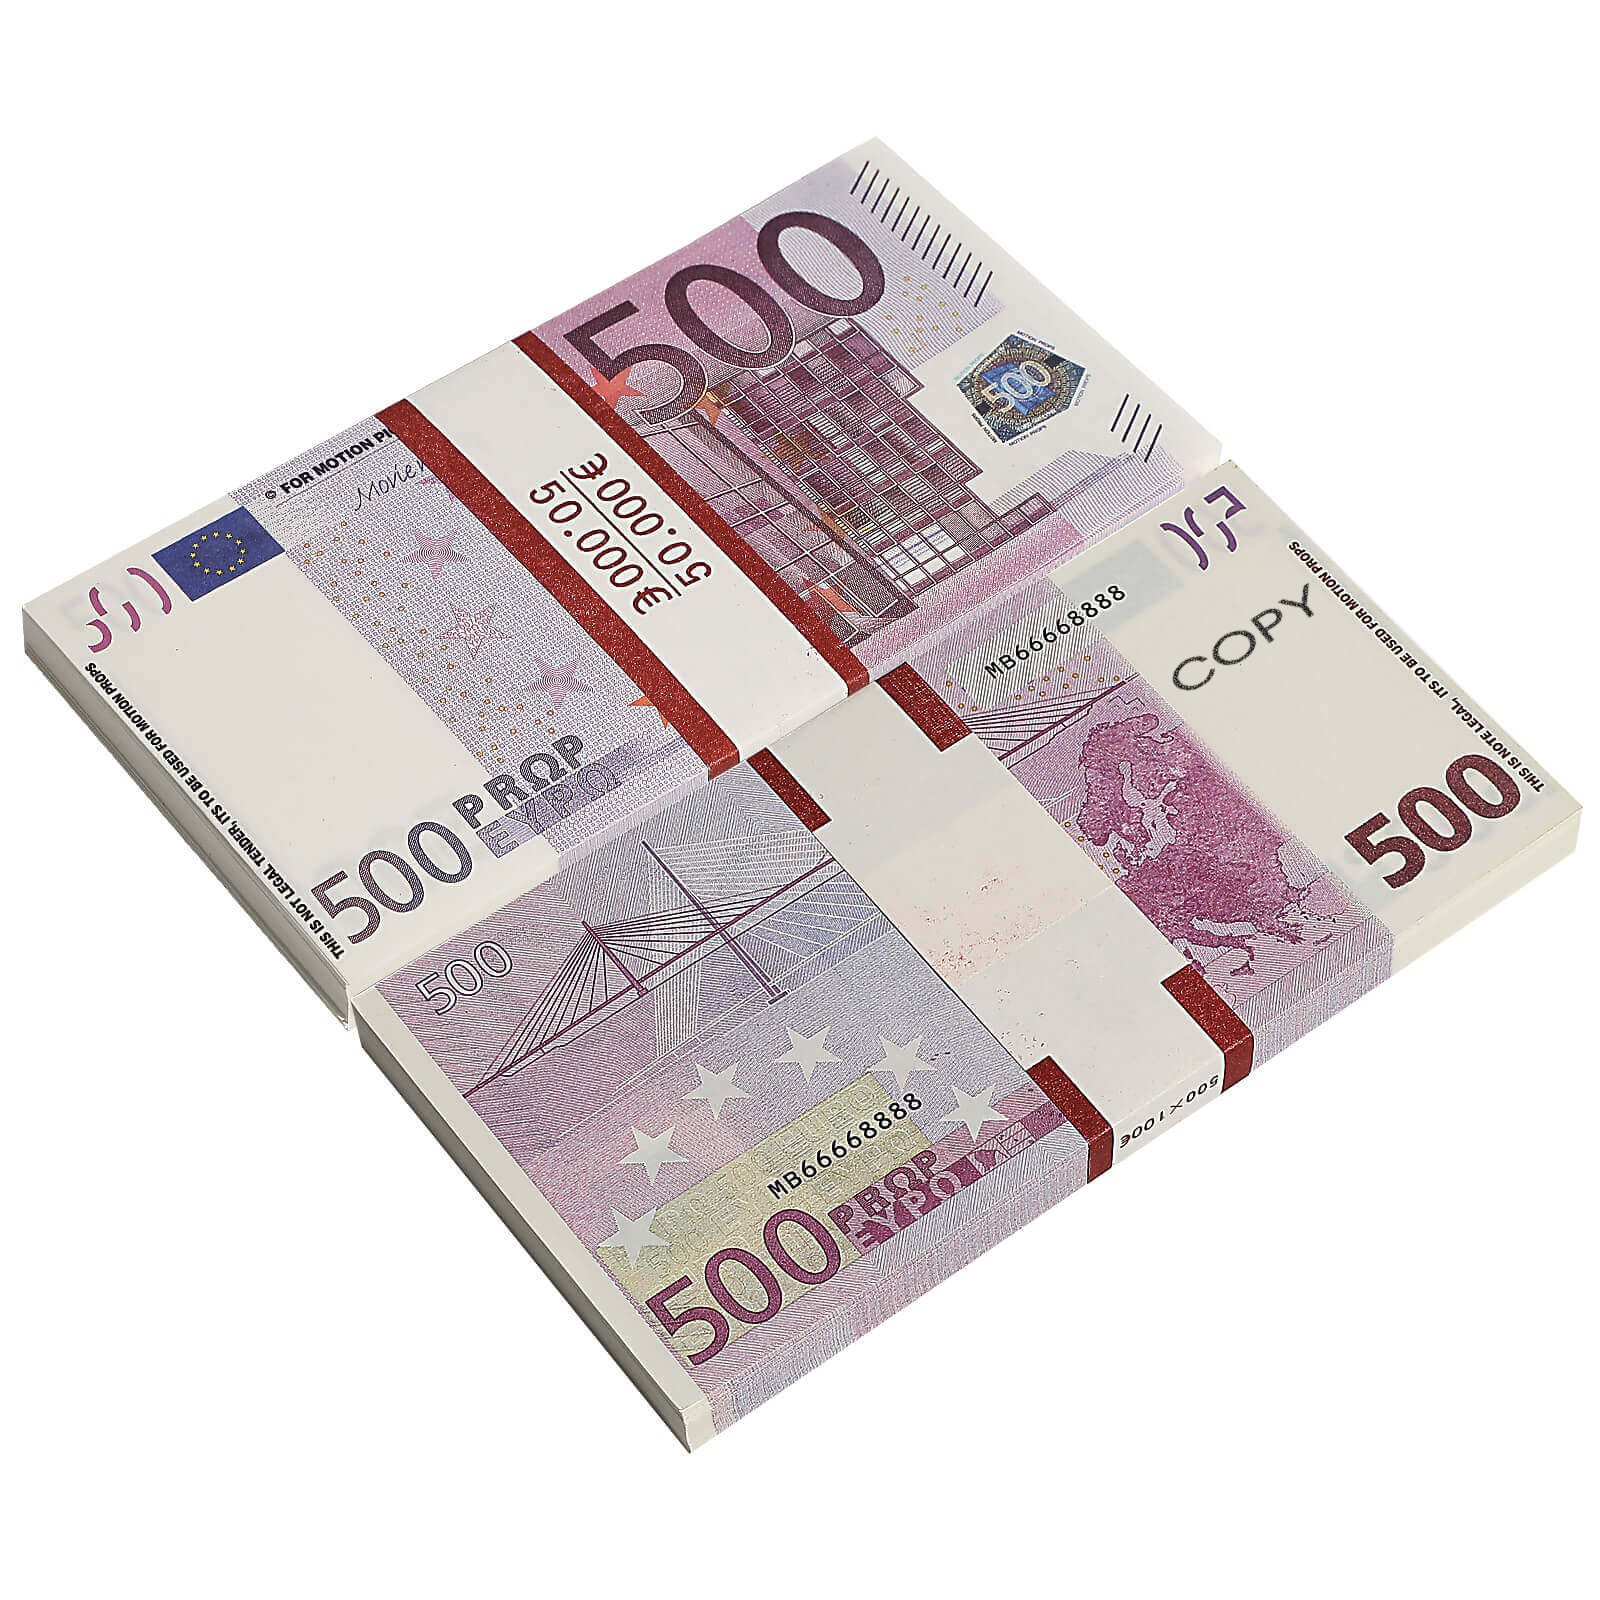 Prop Money 500 Euro Bill for Sale Online Euros Fake Movie Moneys 500 Bills Full Print Copy Party Fake Uk Banknotes Paper Note Pretend Double Sided